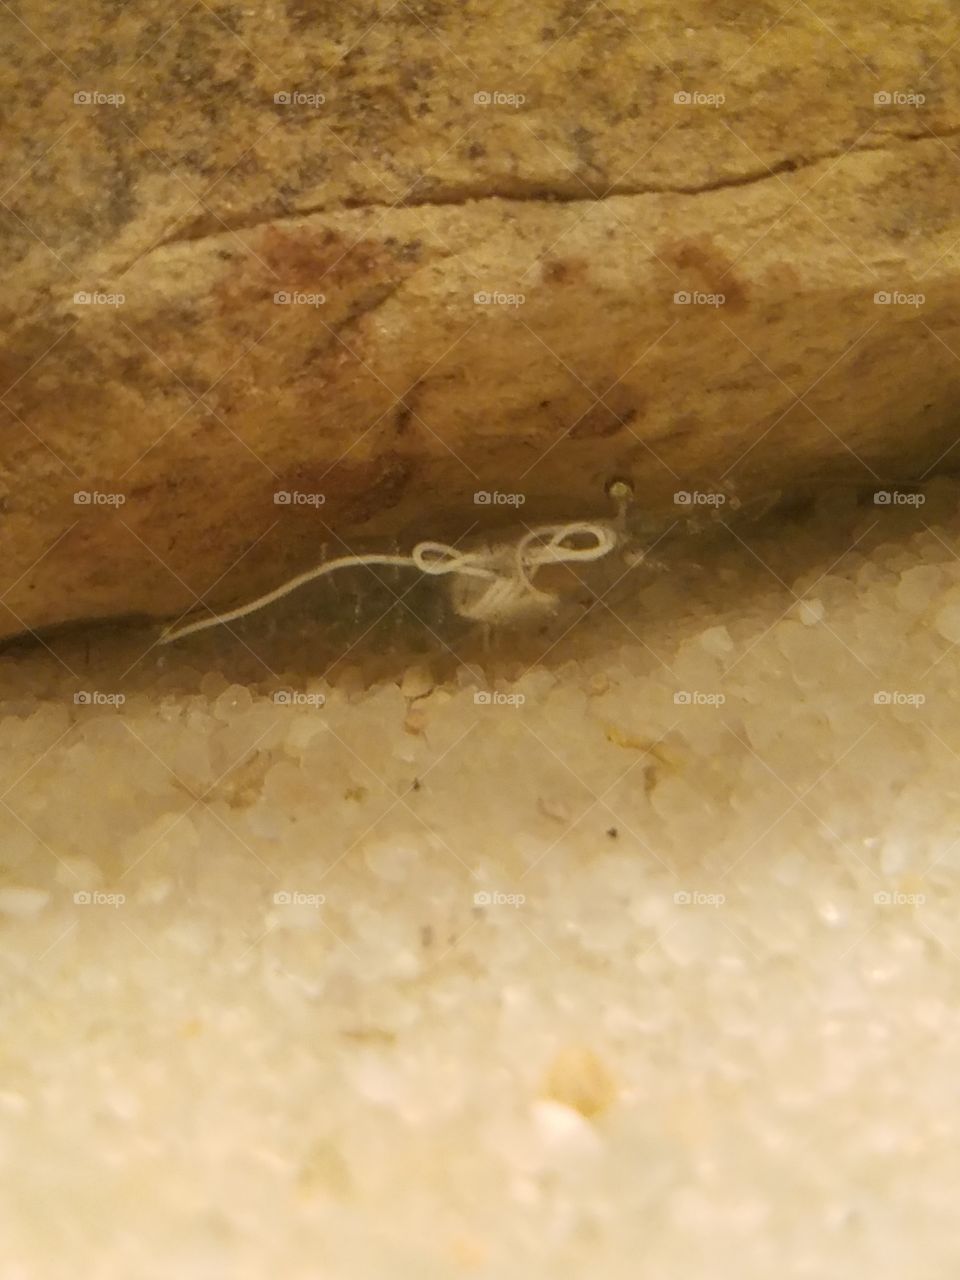 Ghost Shrimp with Horsehair worm.